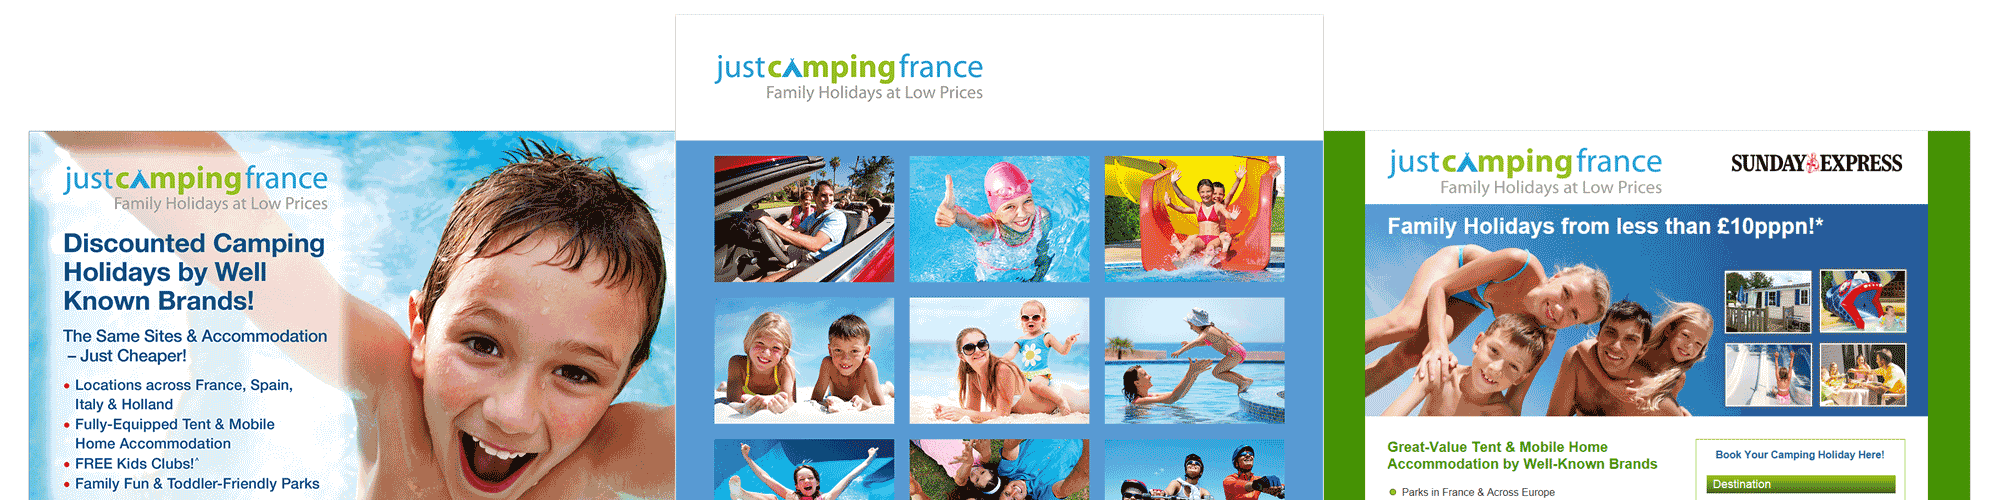 Screenshot of the Just Camping France case study by Michael Saunders